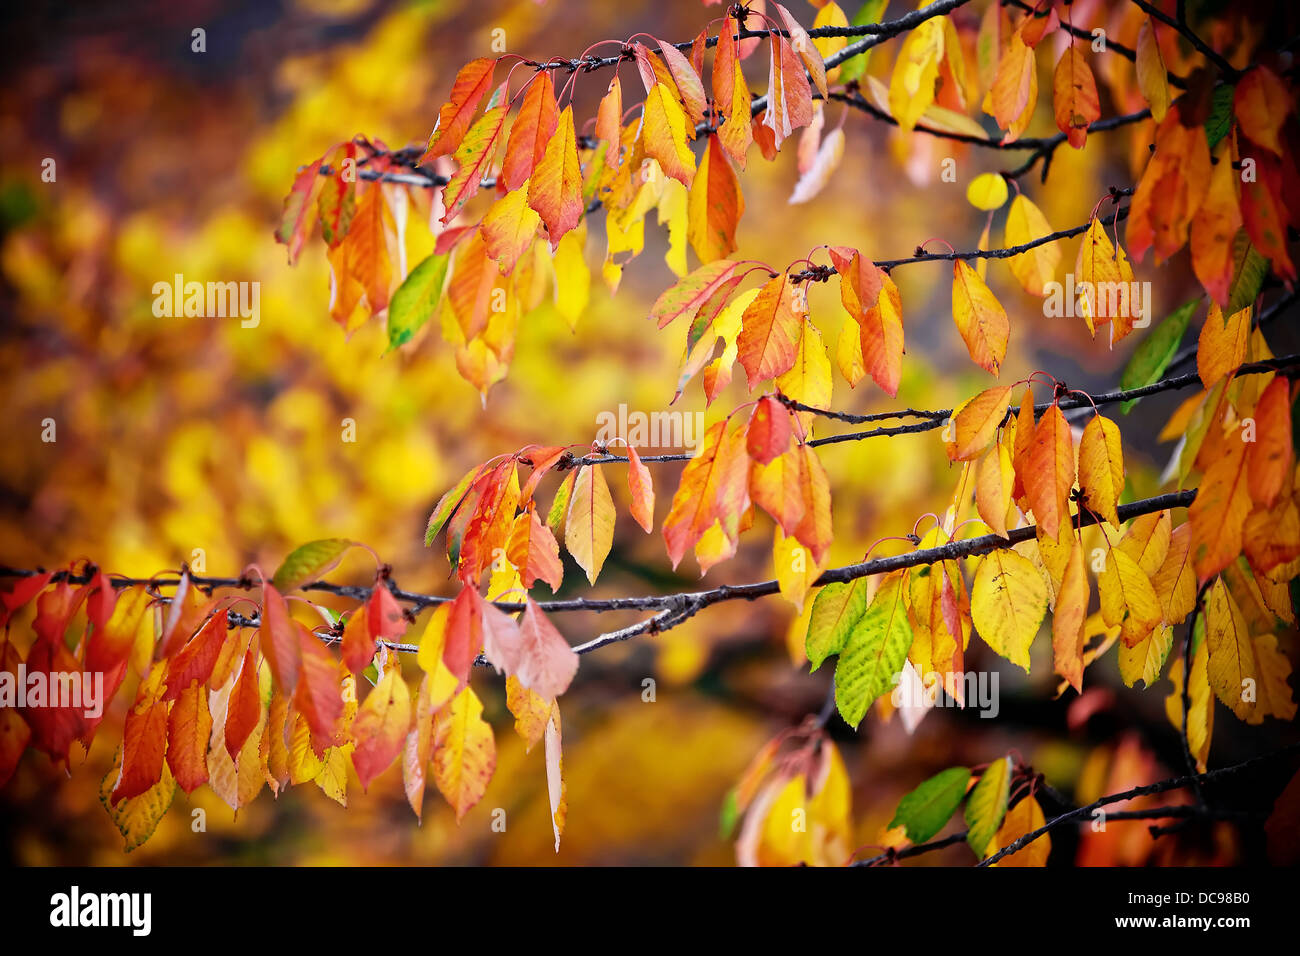 background from autumn yellow and orange leaves Stock Photo